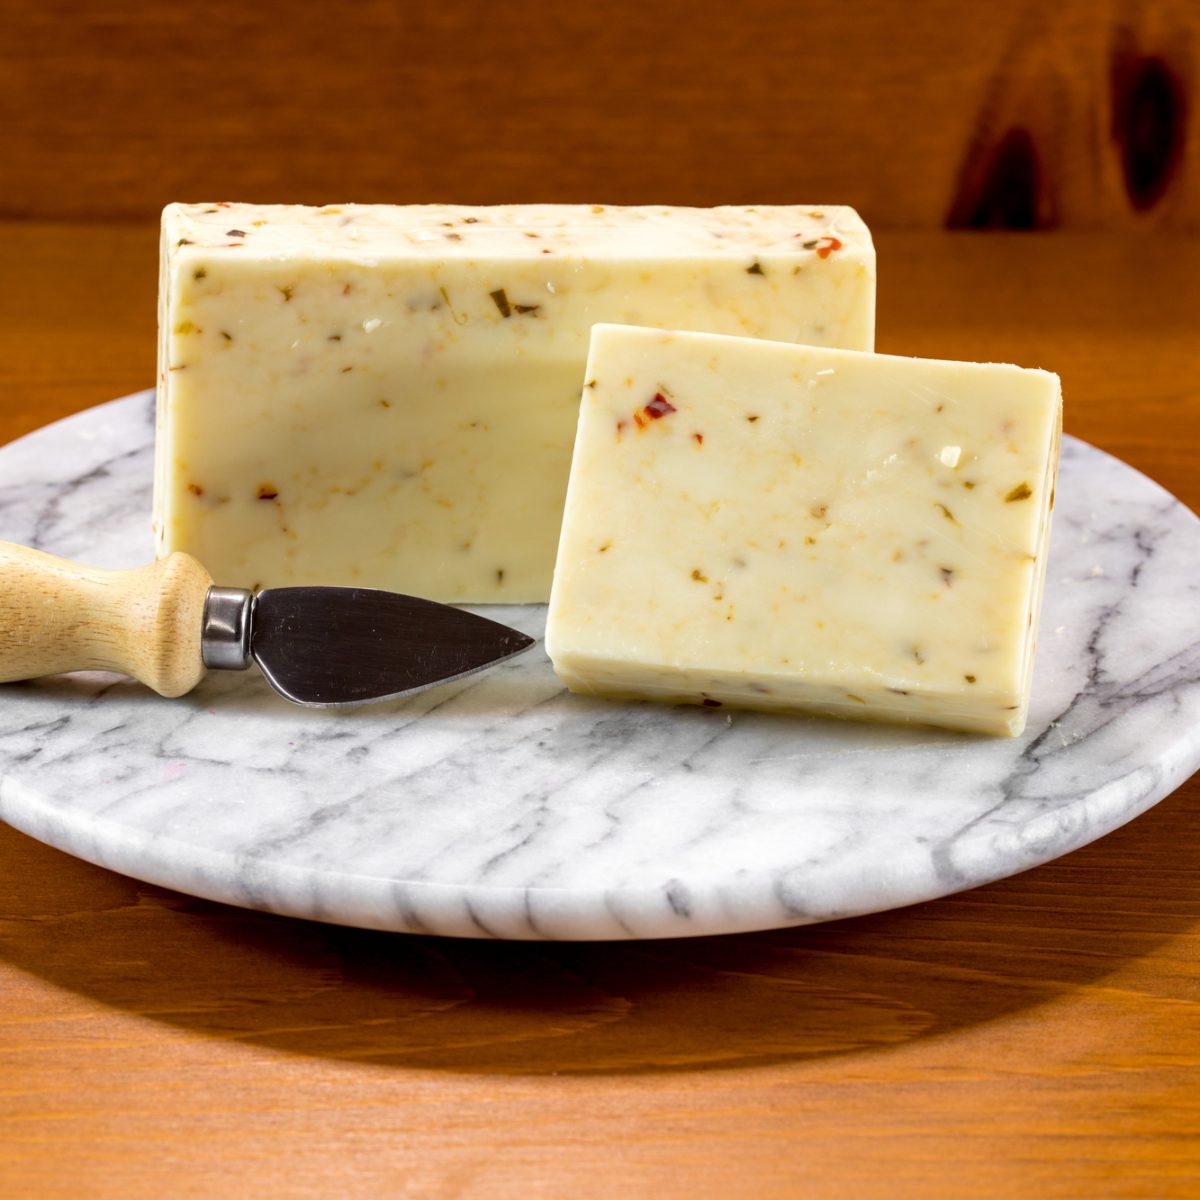 Cheese with spice